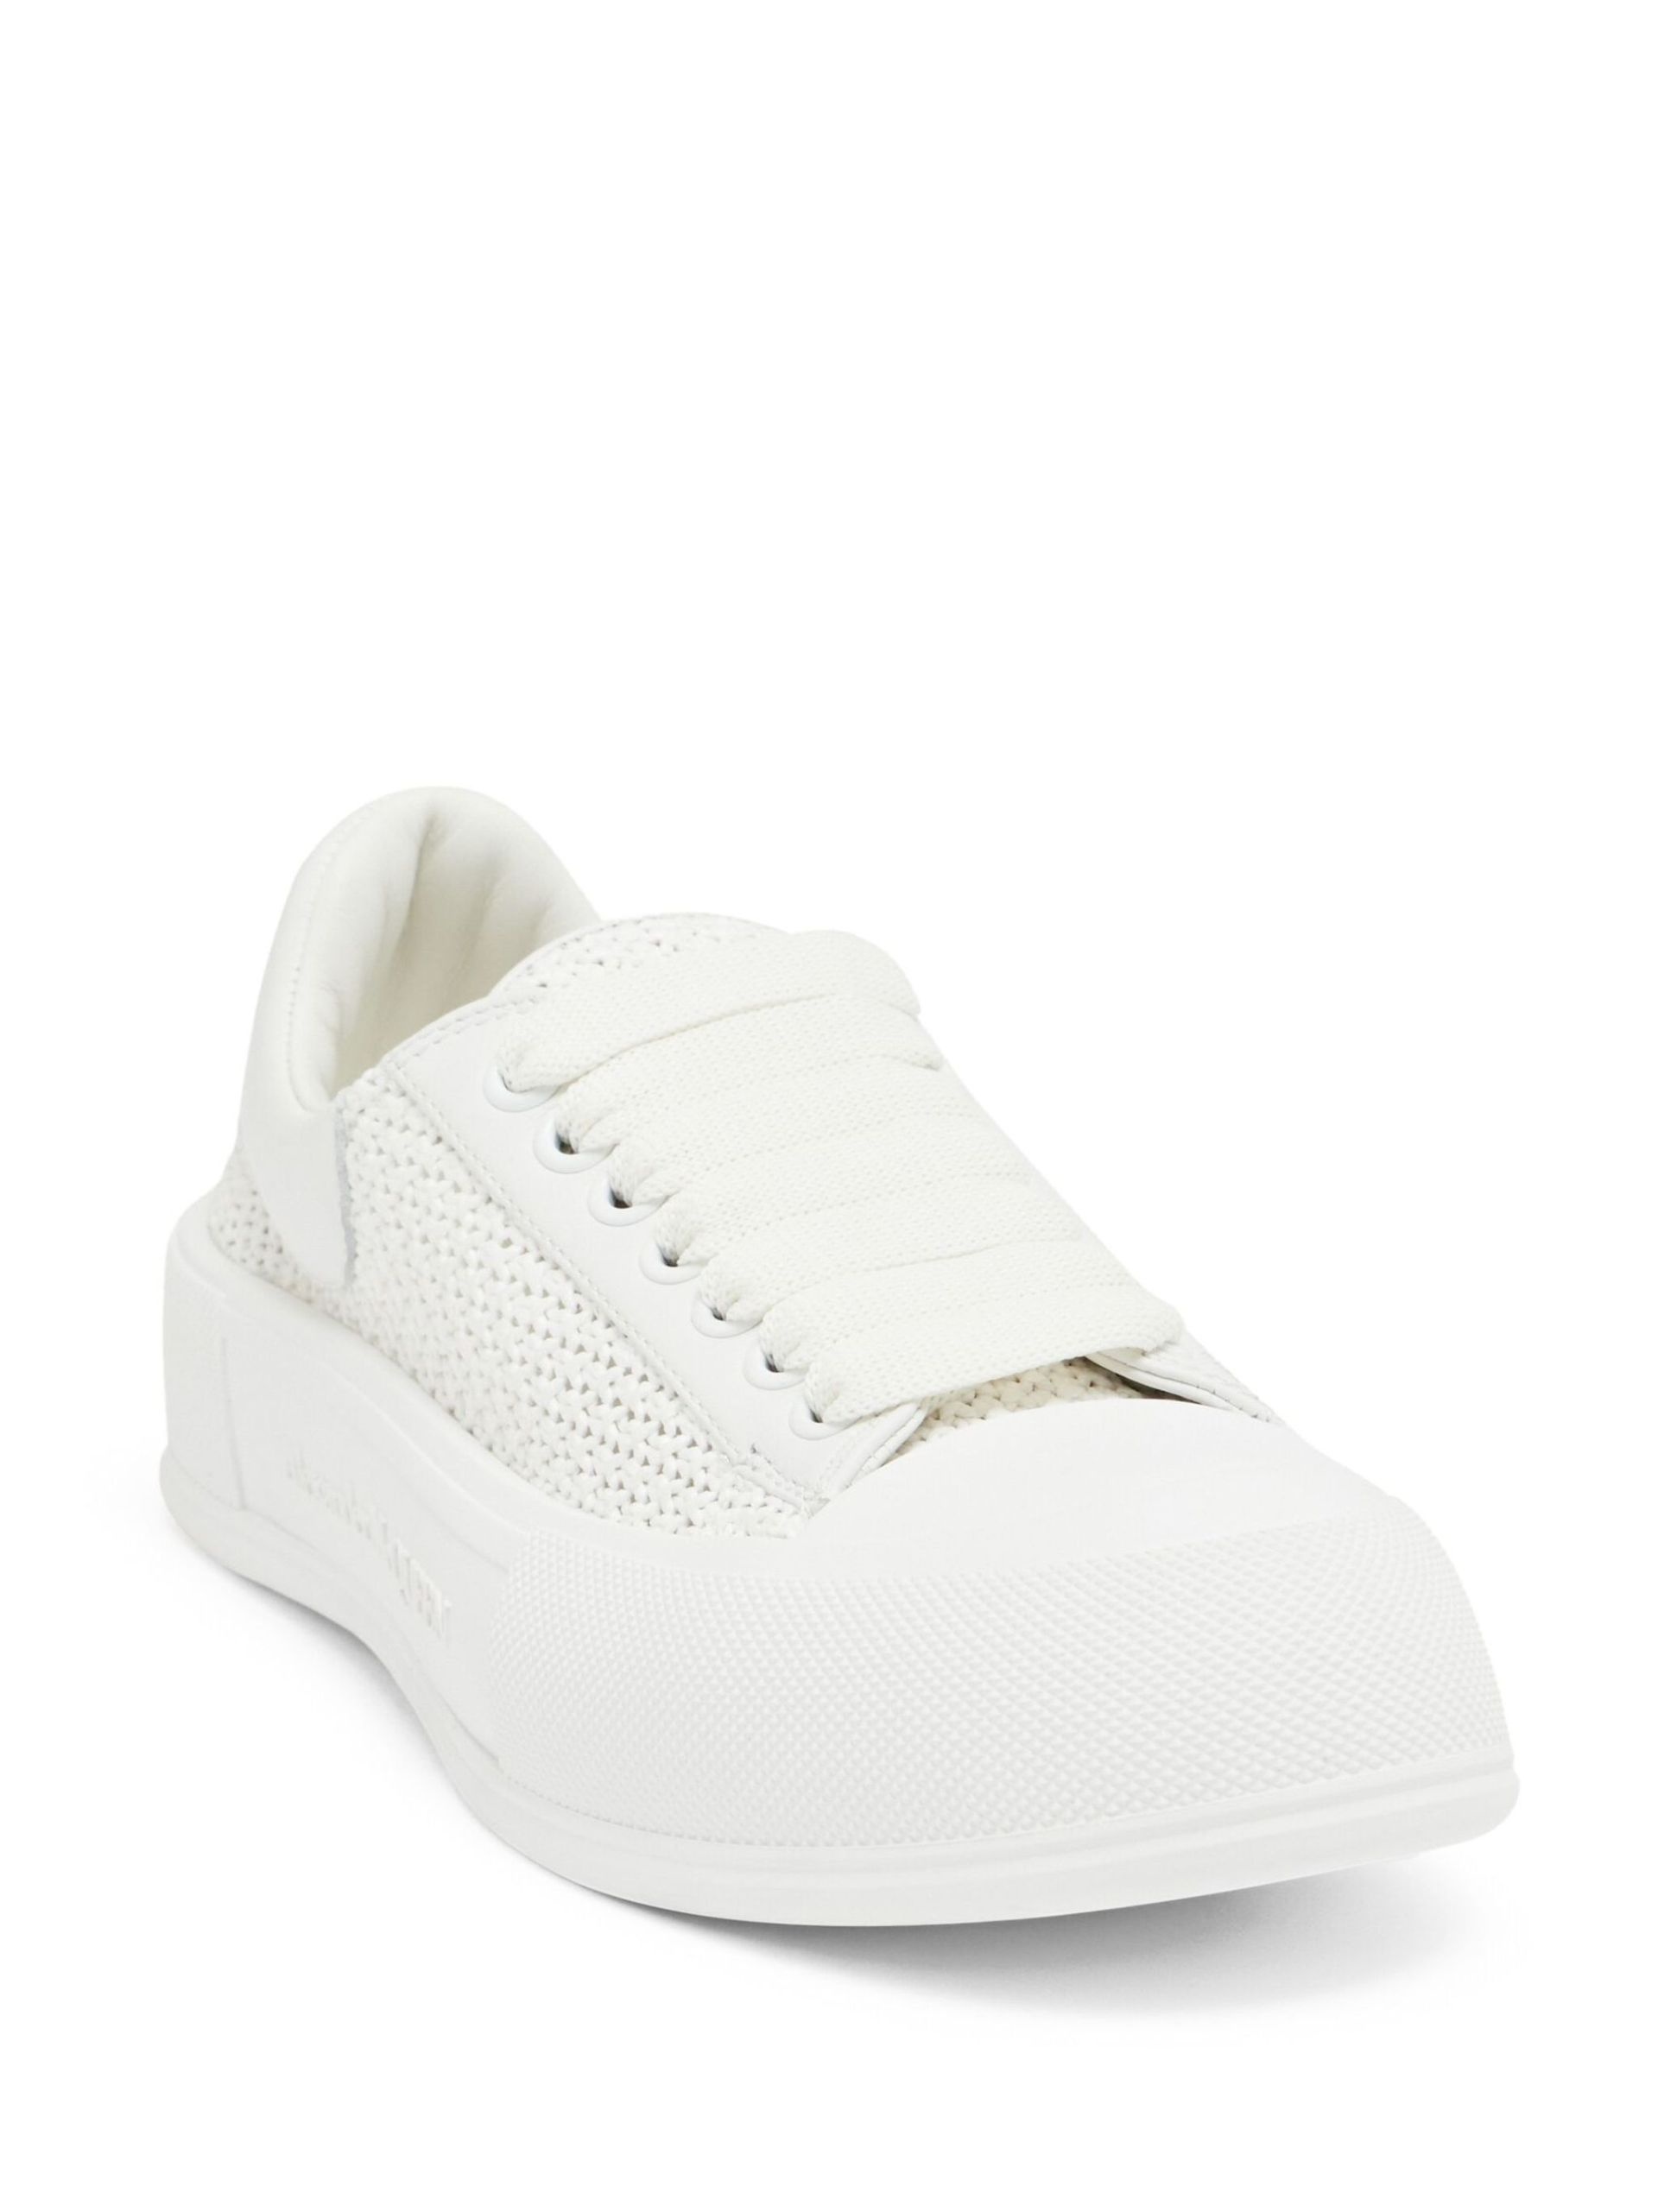 White Deck Plimsoll Woven Sneakers - 2